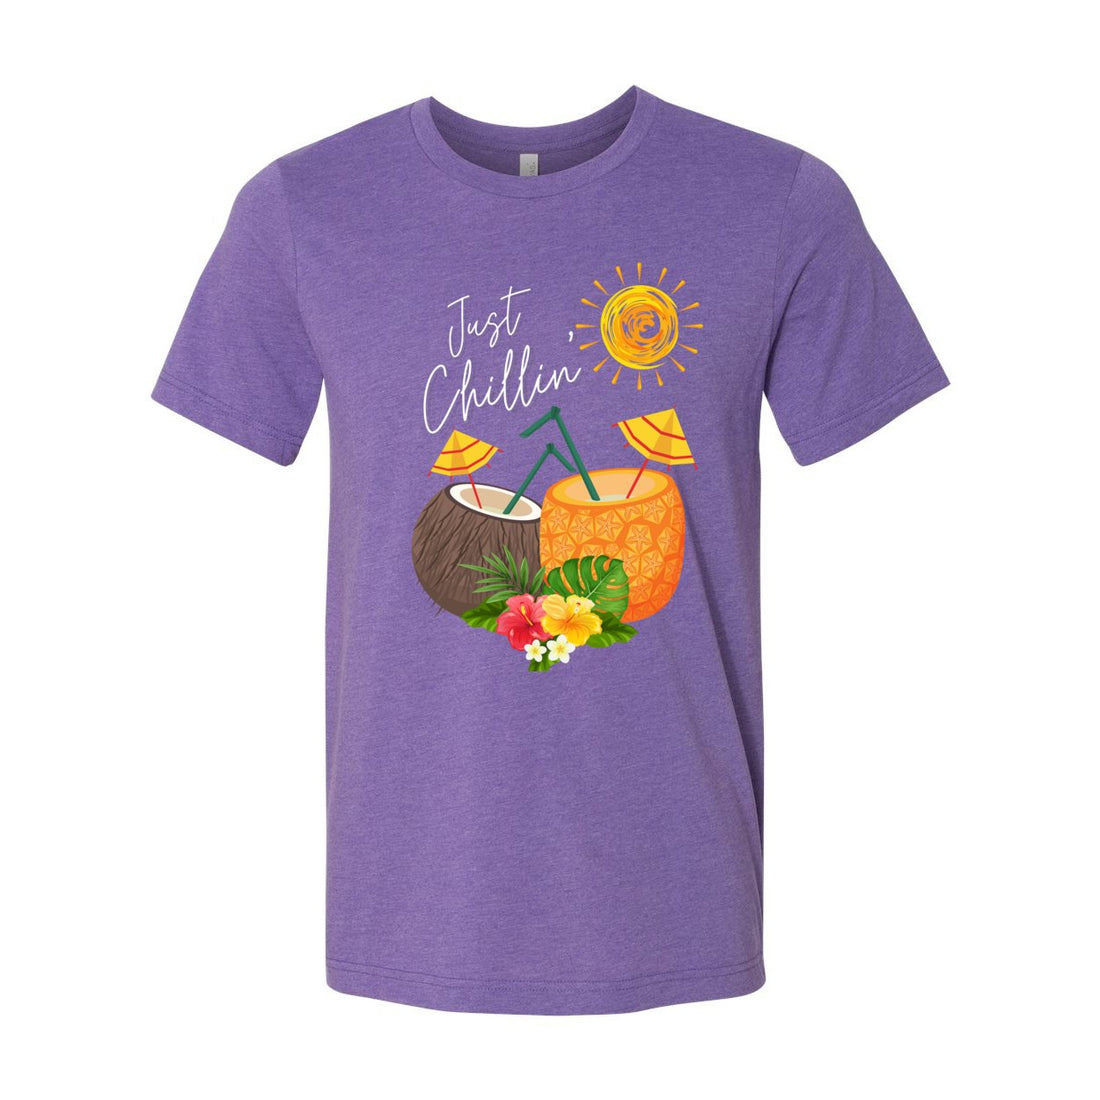 Just Chillin' Sleeve Jersey Tee - T-Shirts - Positively Sassy - Just Chillin' Sleeve Jersey Tee